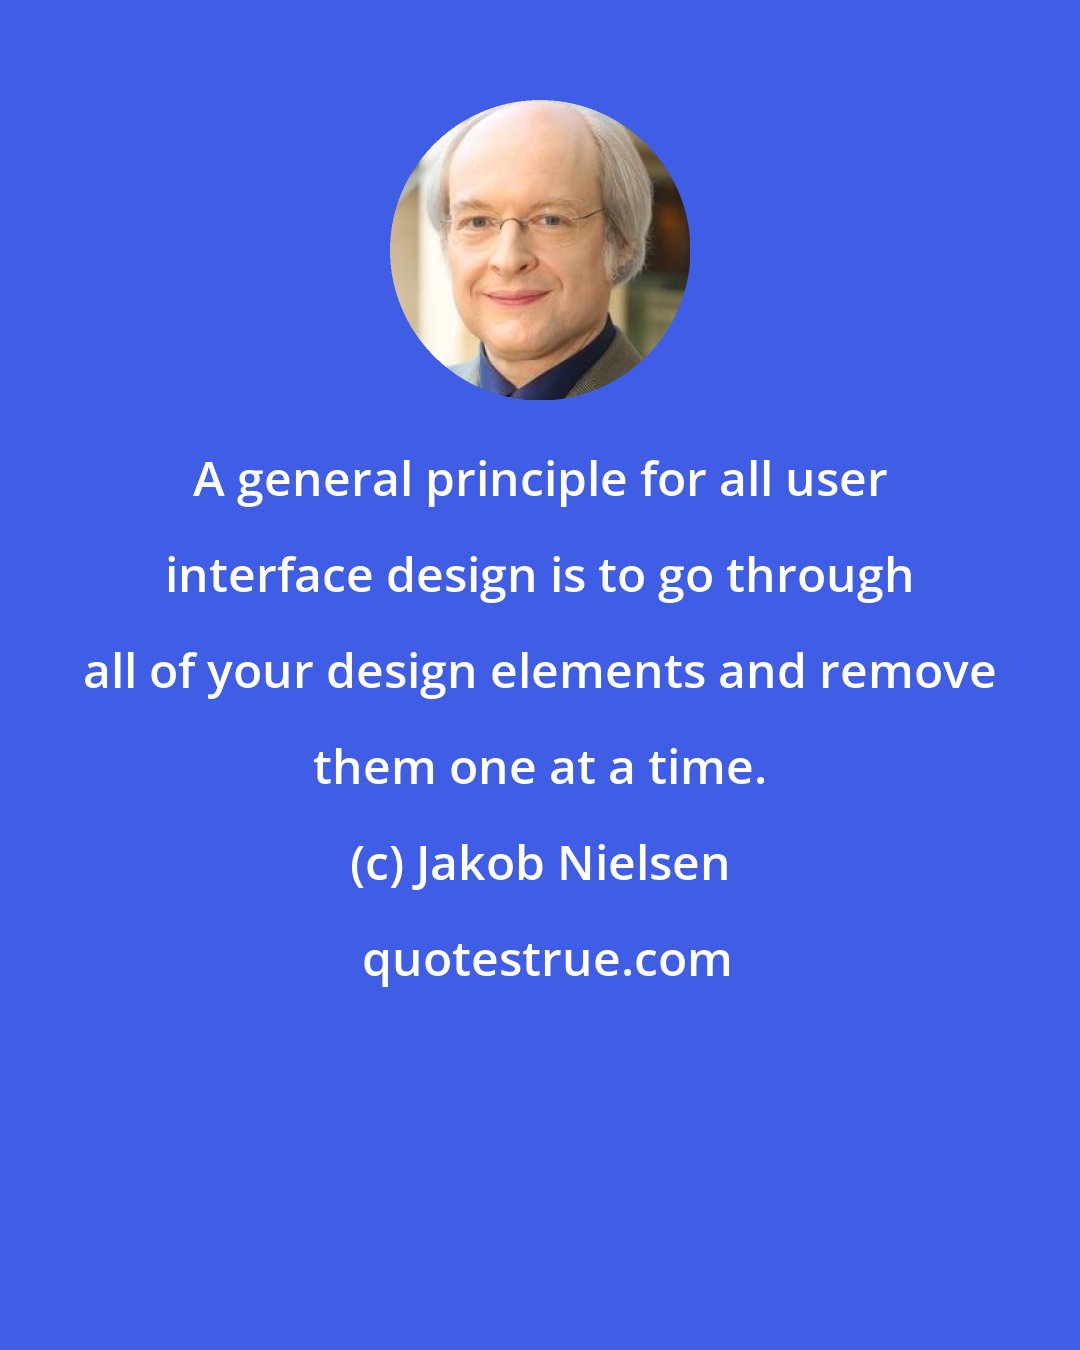 Jakob Nielsen: A general principle for all user interface design is to go through all of your design elements and remove them one at a time.